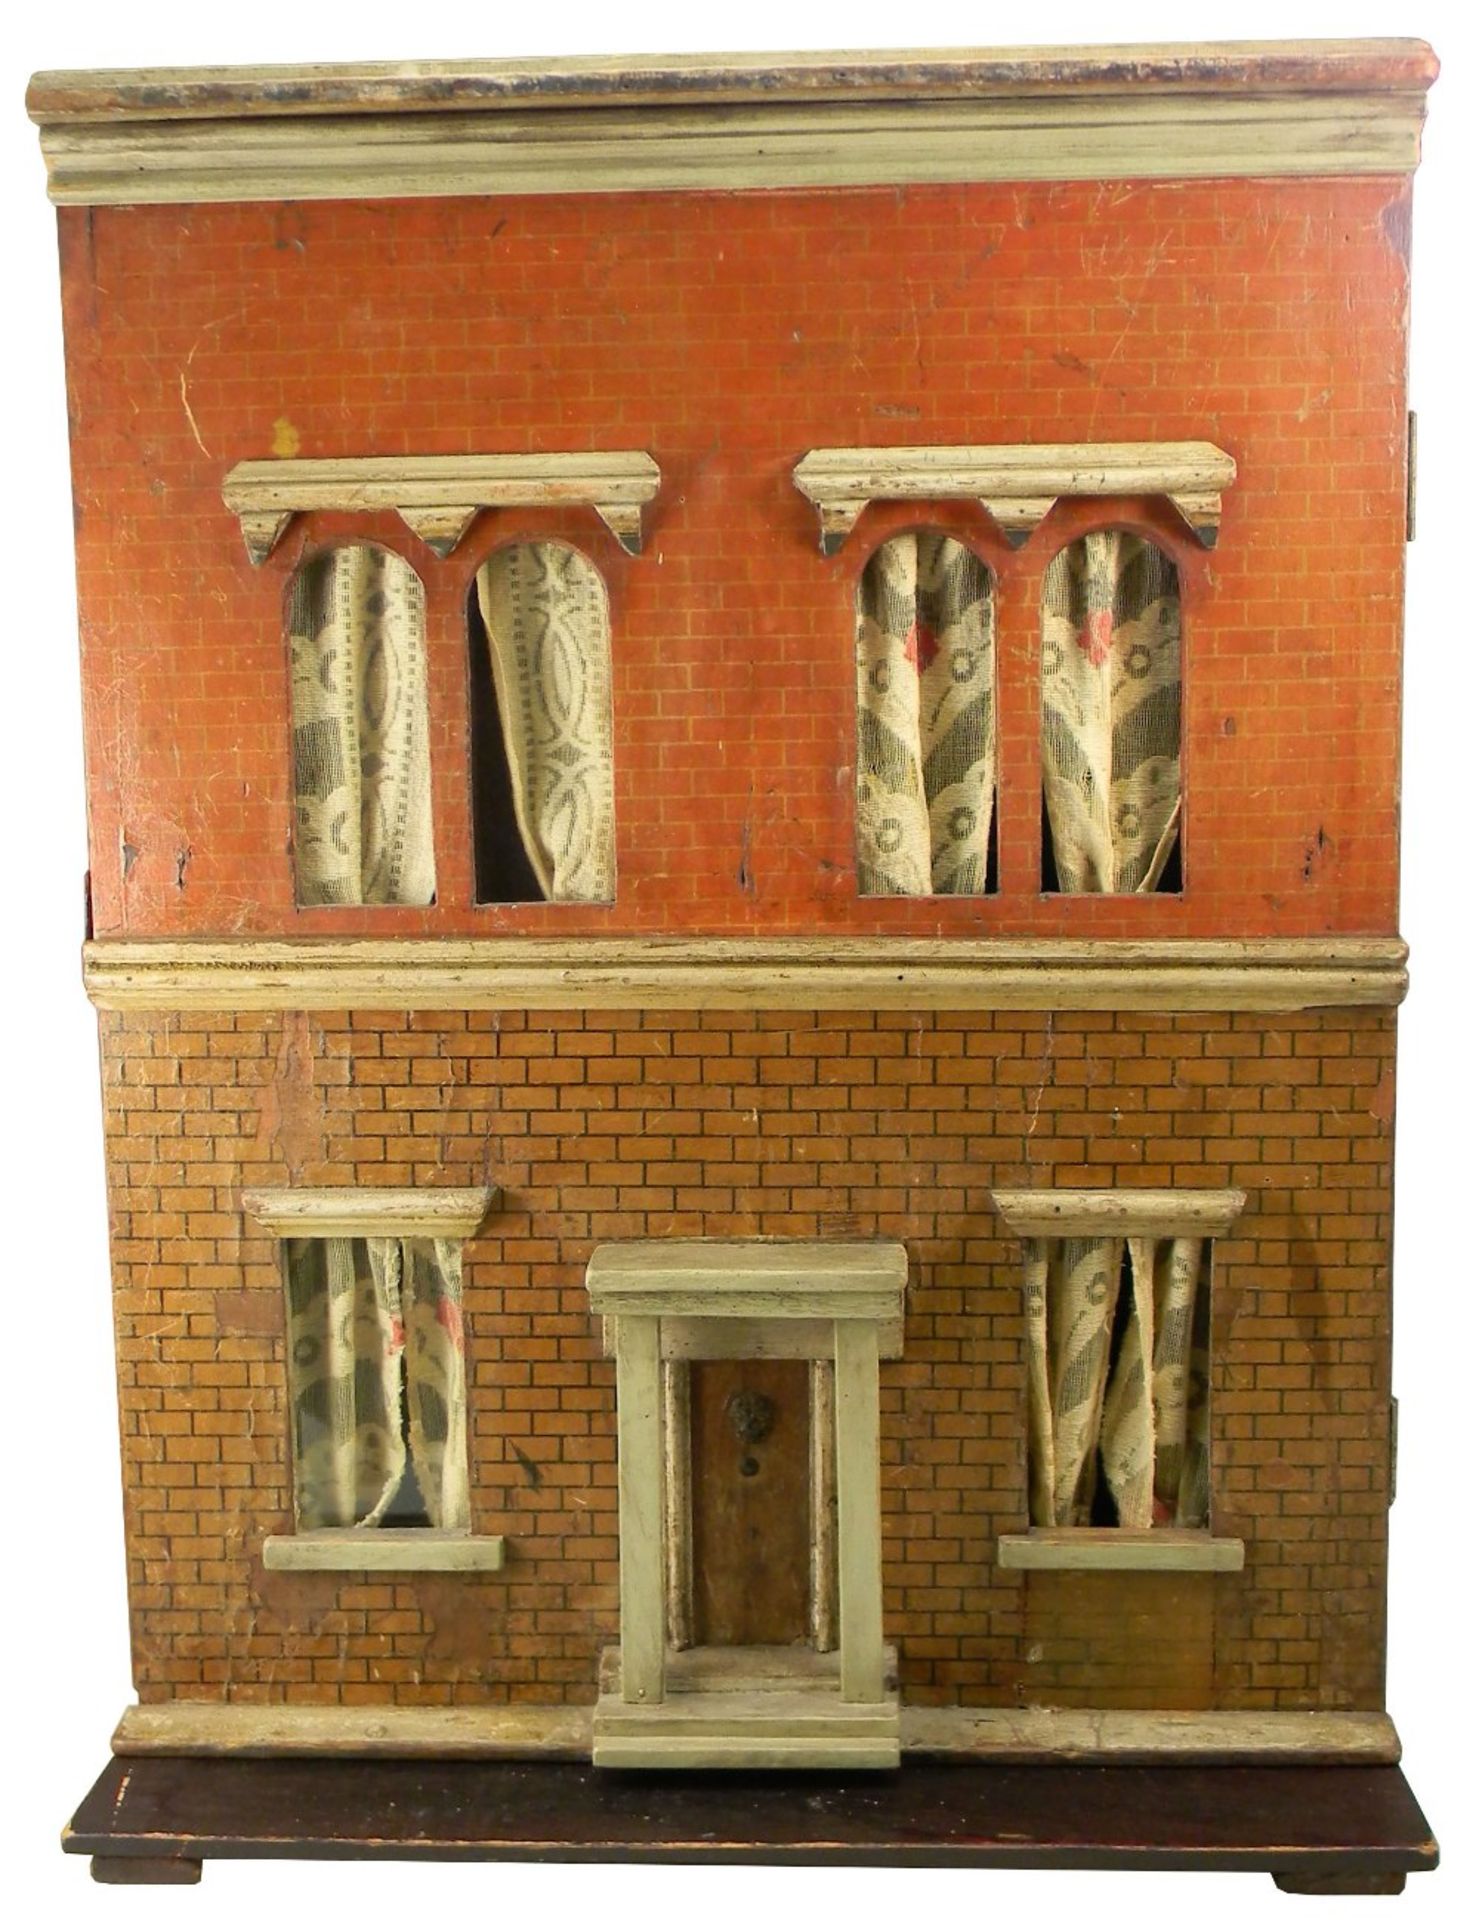 A Silber & Flemming painted wooden dolls house with contents, German circa 1880,